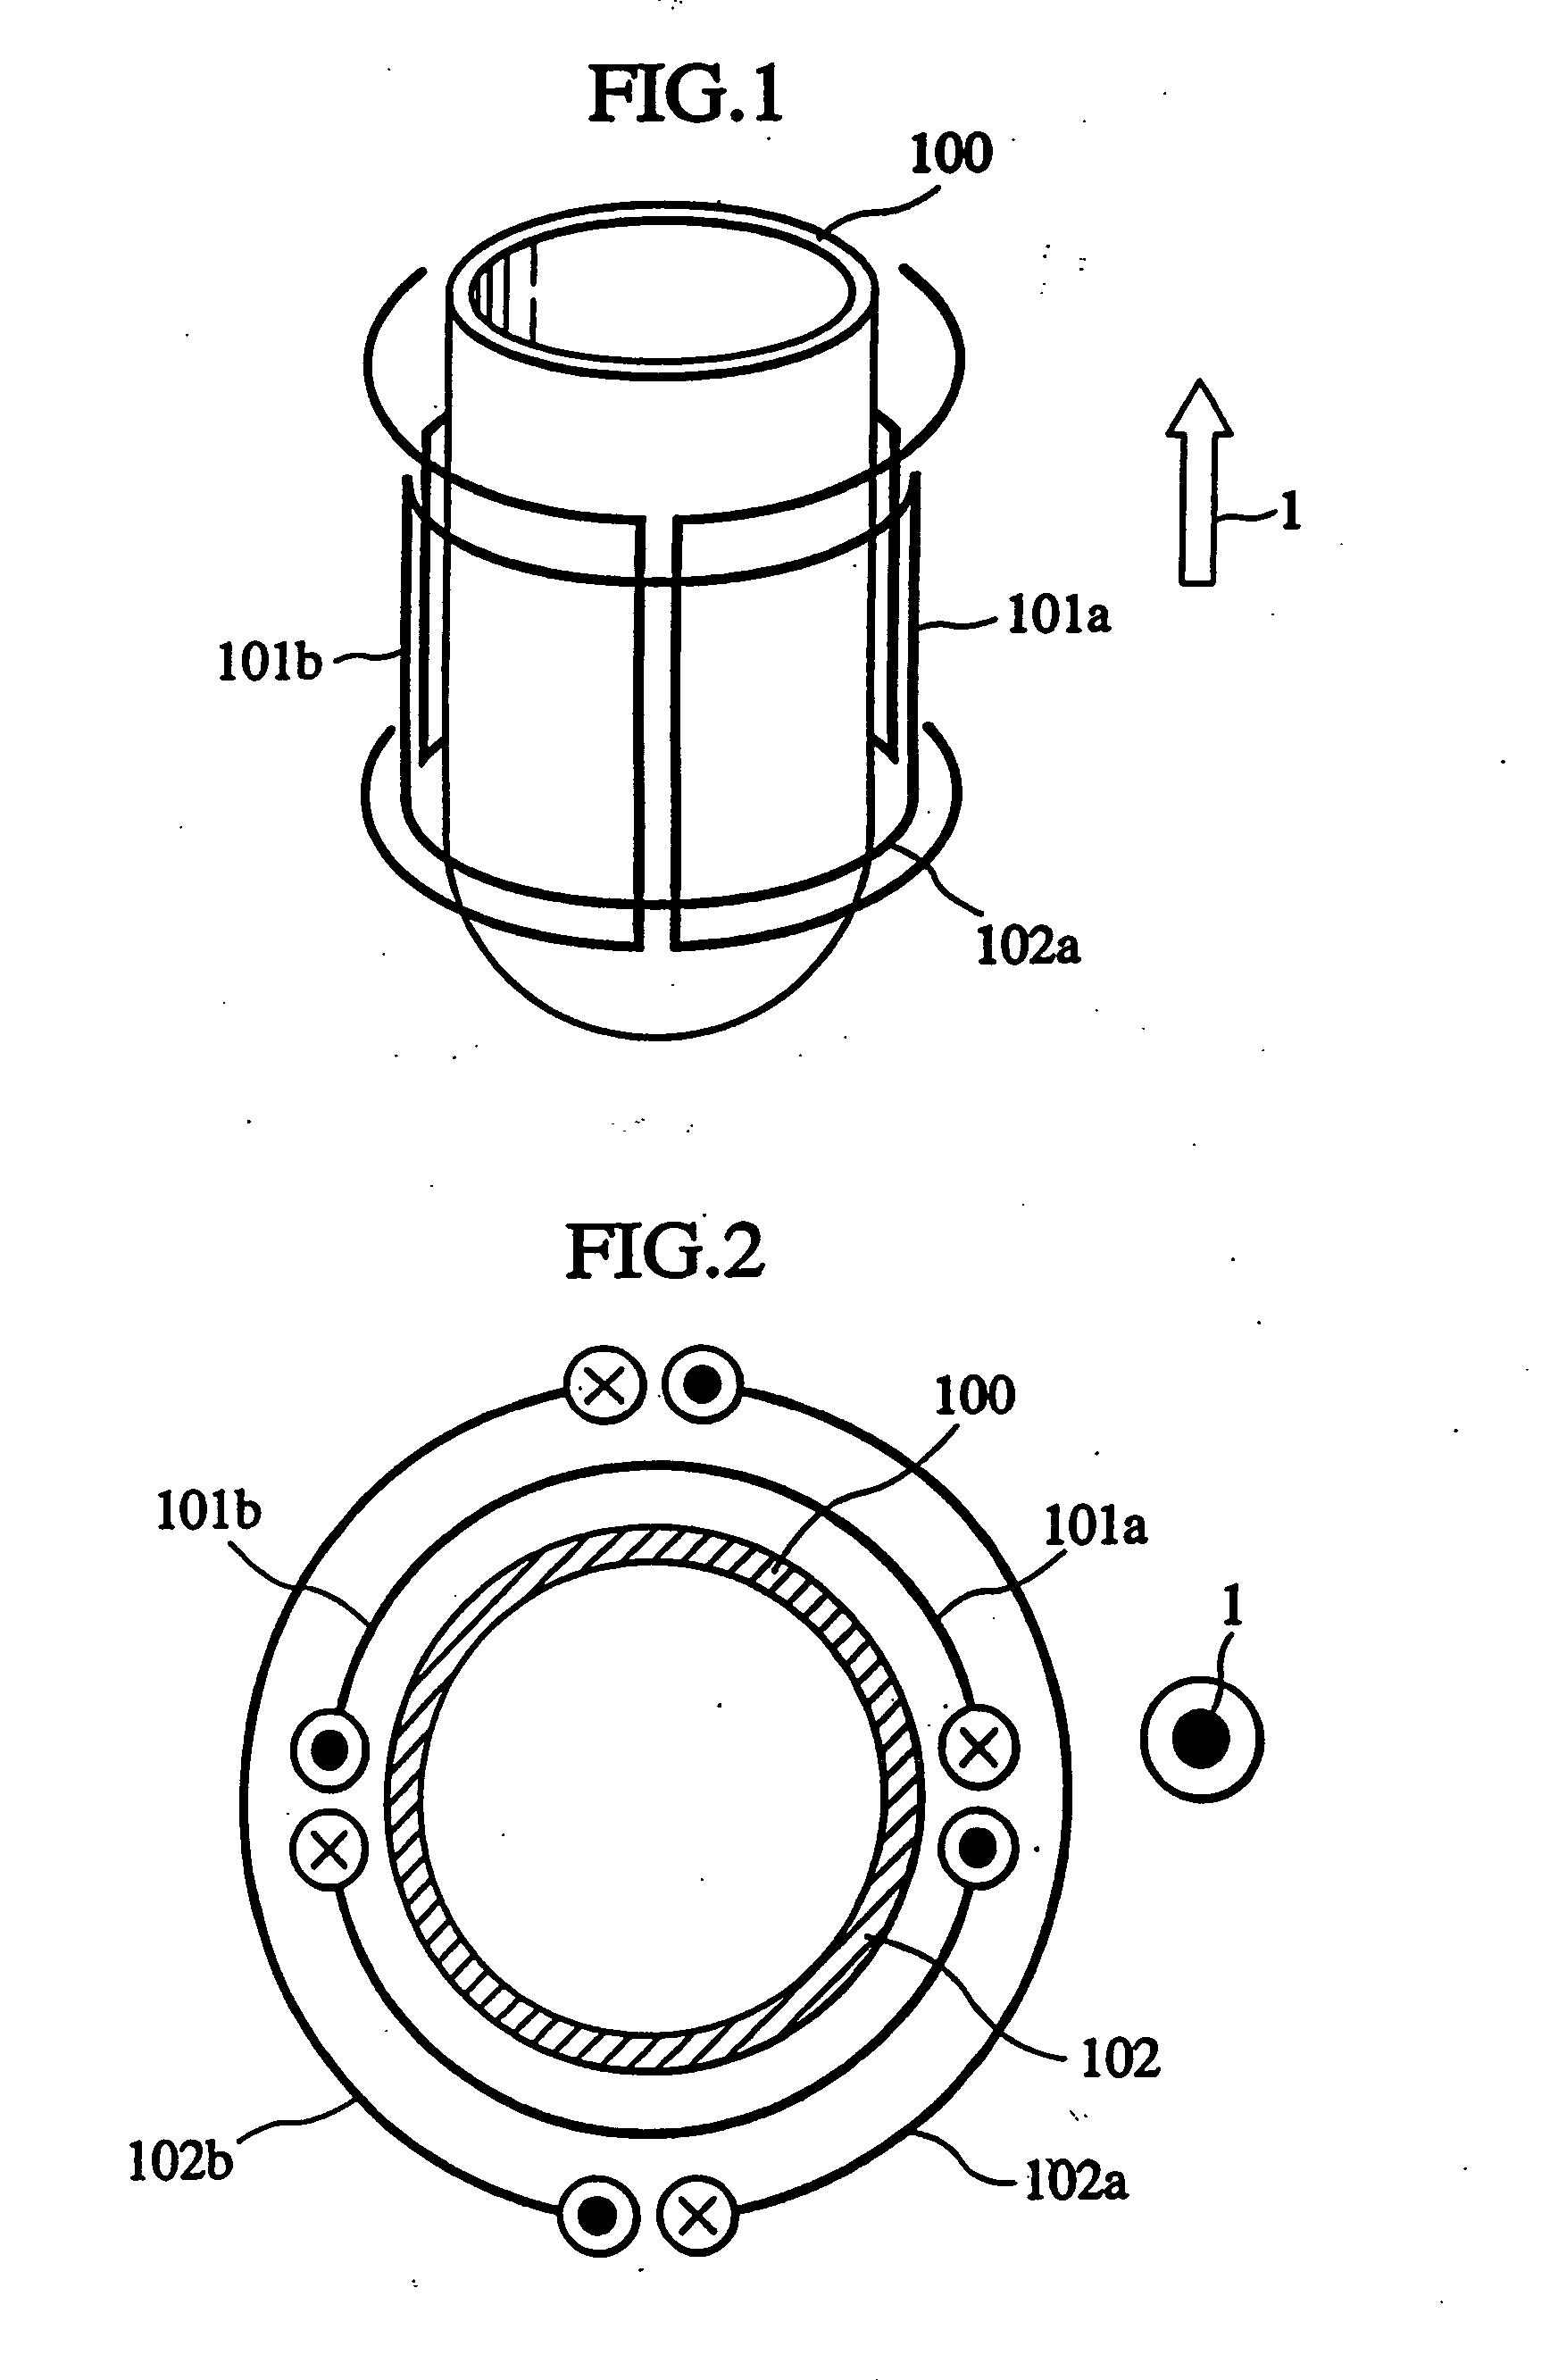 Nuclear magnetic resonance apparatus probe